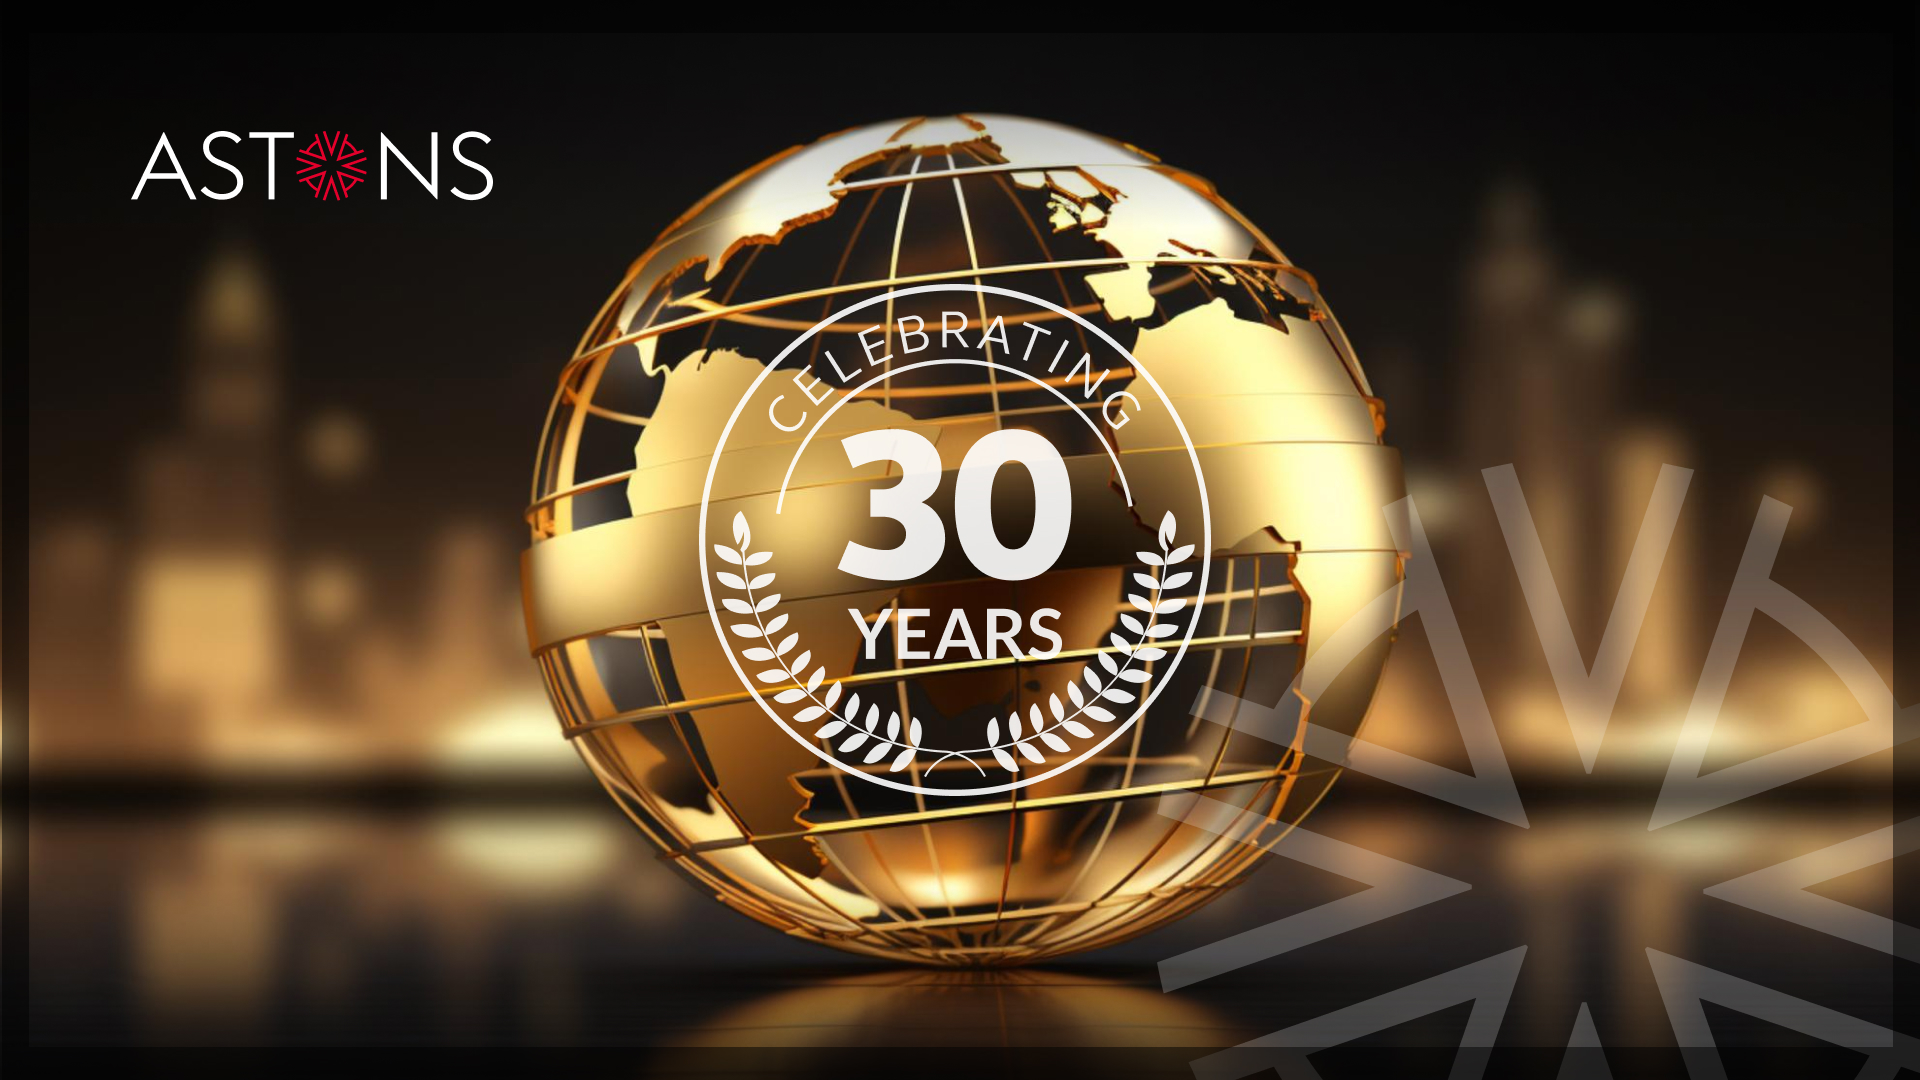 A gold globe showcasing Astons 30 years of experience in the citizenship by investment and golden visa industry